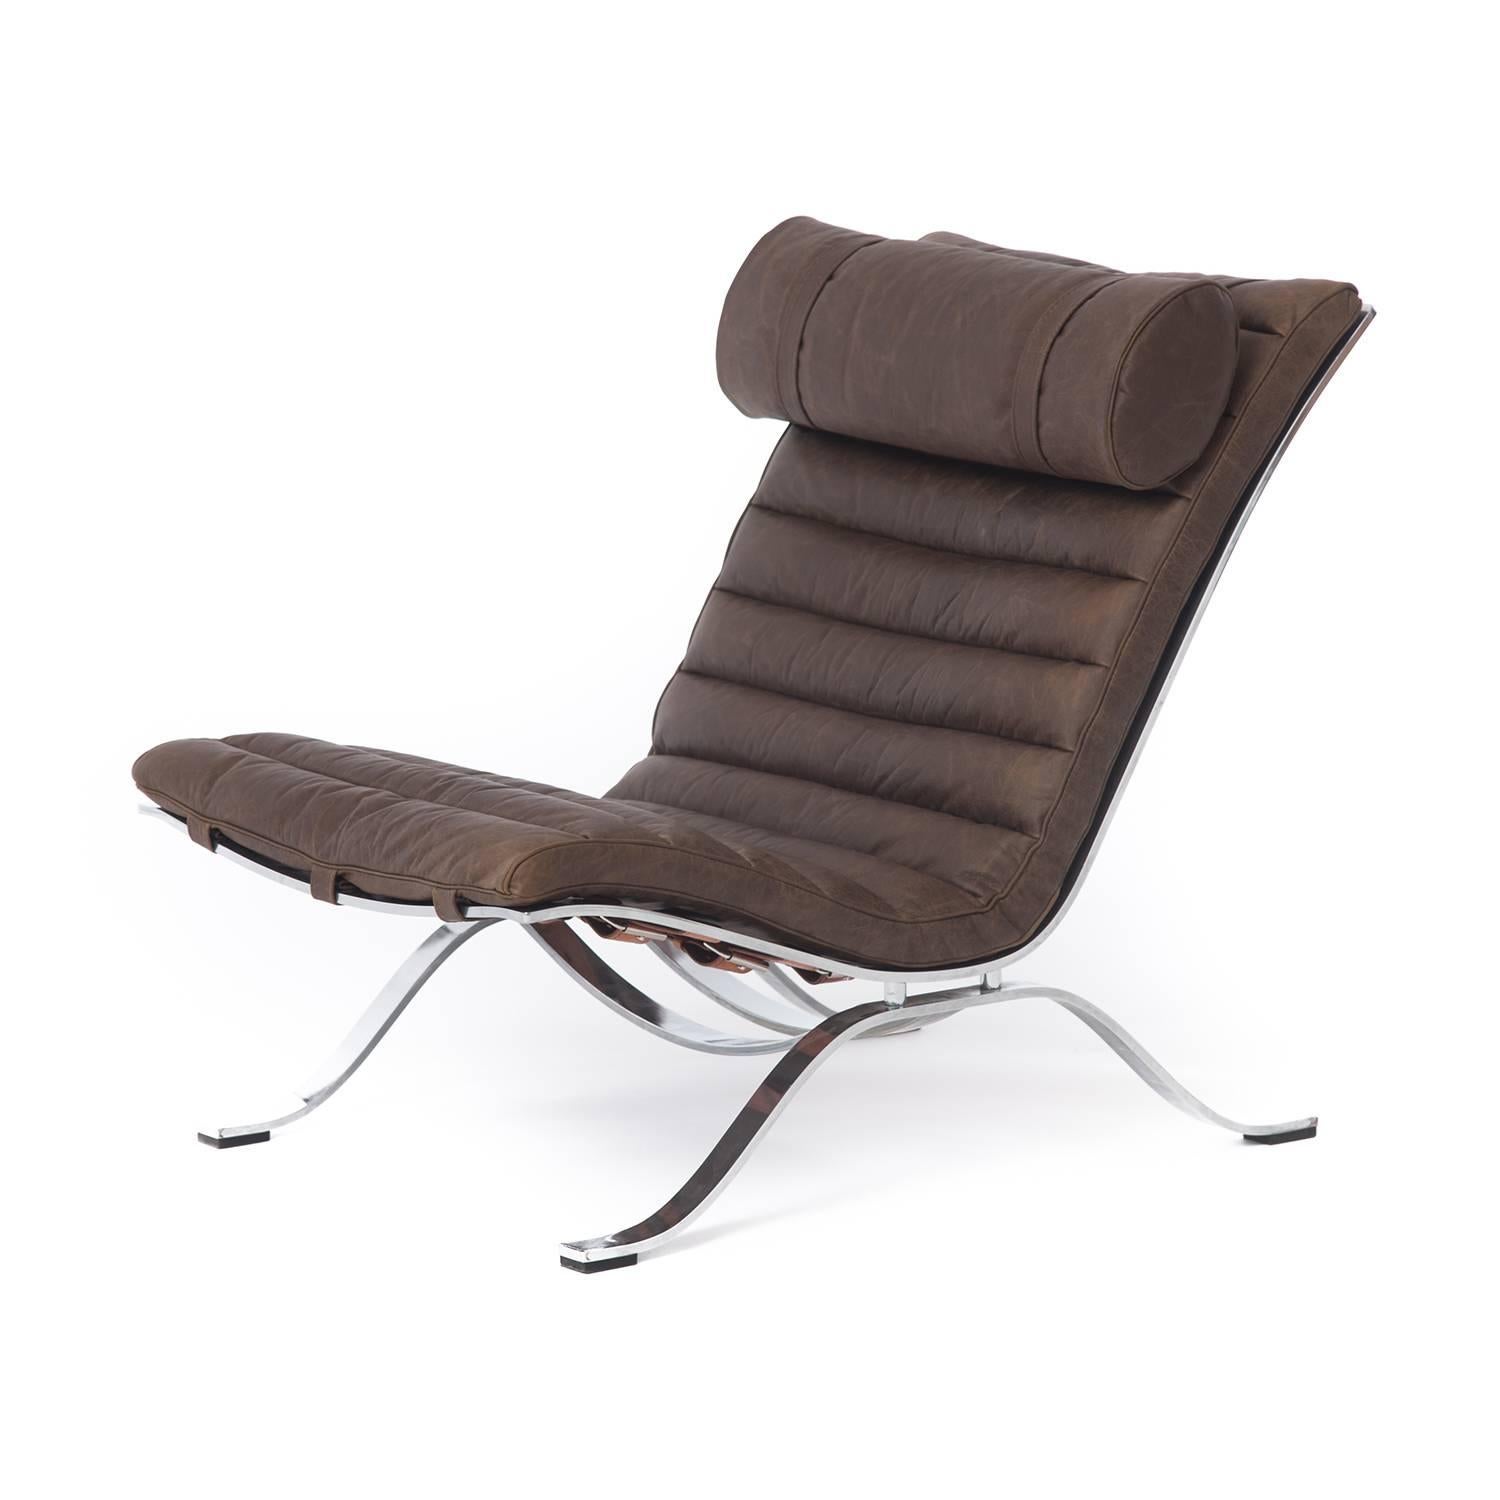 This classic lounge designed by Arne Norell for Arne Norell AB Sweden is crafted from a chromed steel frame and boasts new high quality upholstery in Italian leather by Studio Art.  Heavyweight, supple and pliable leather (cutting sample available